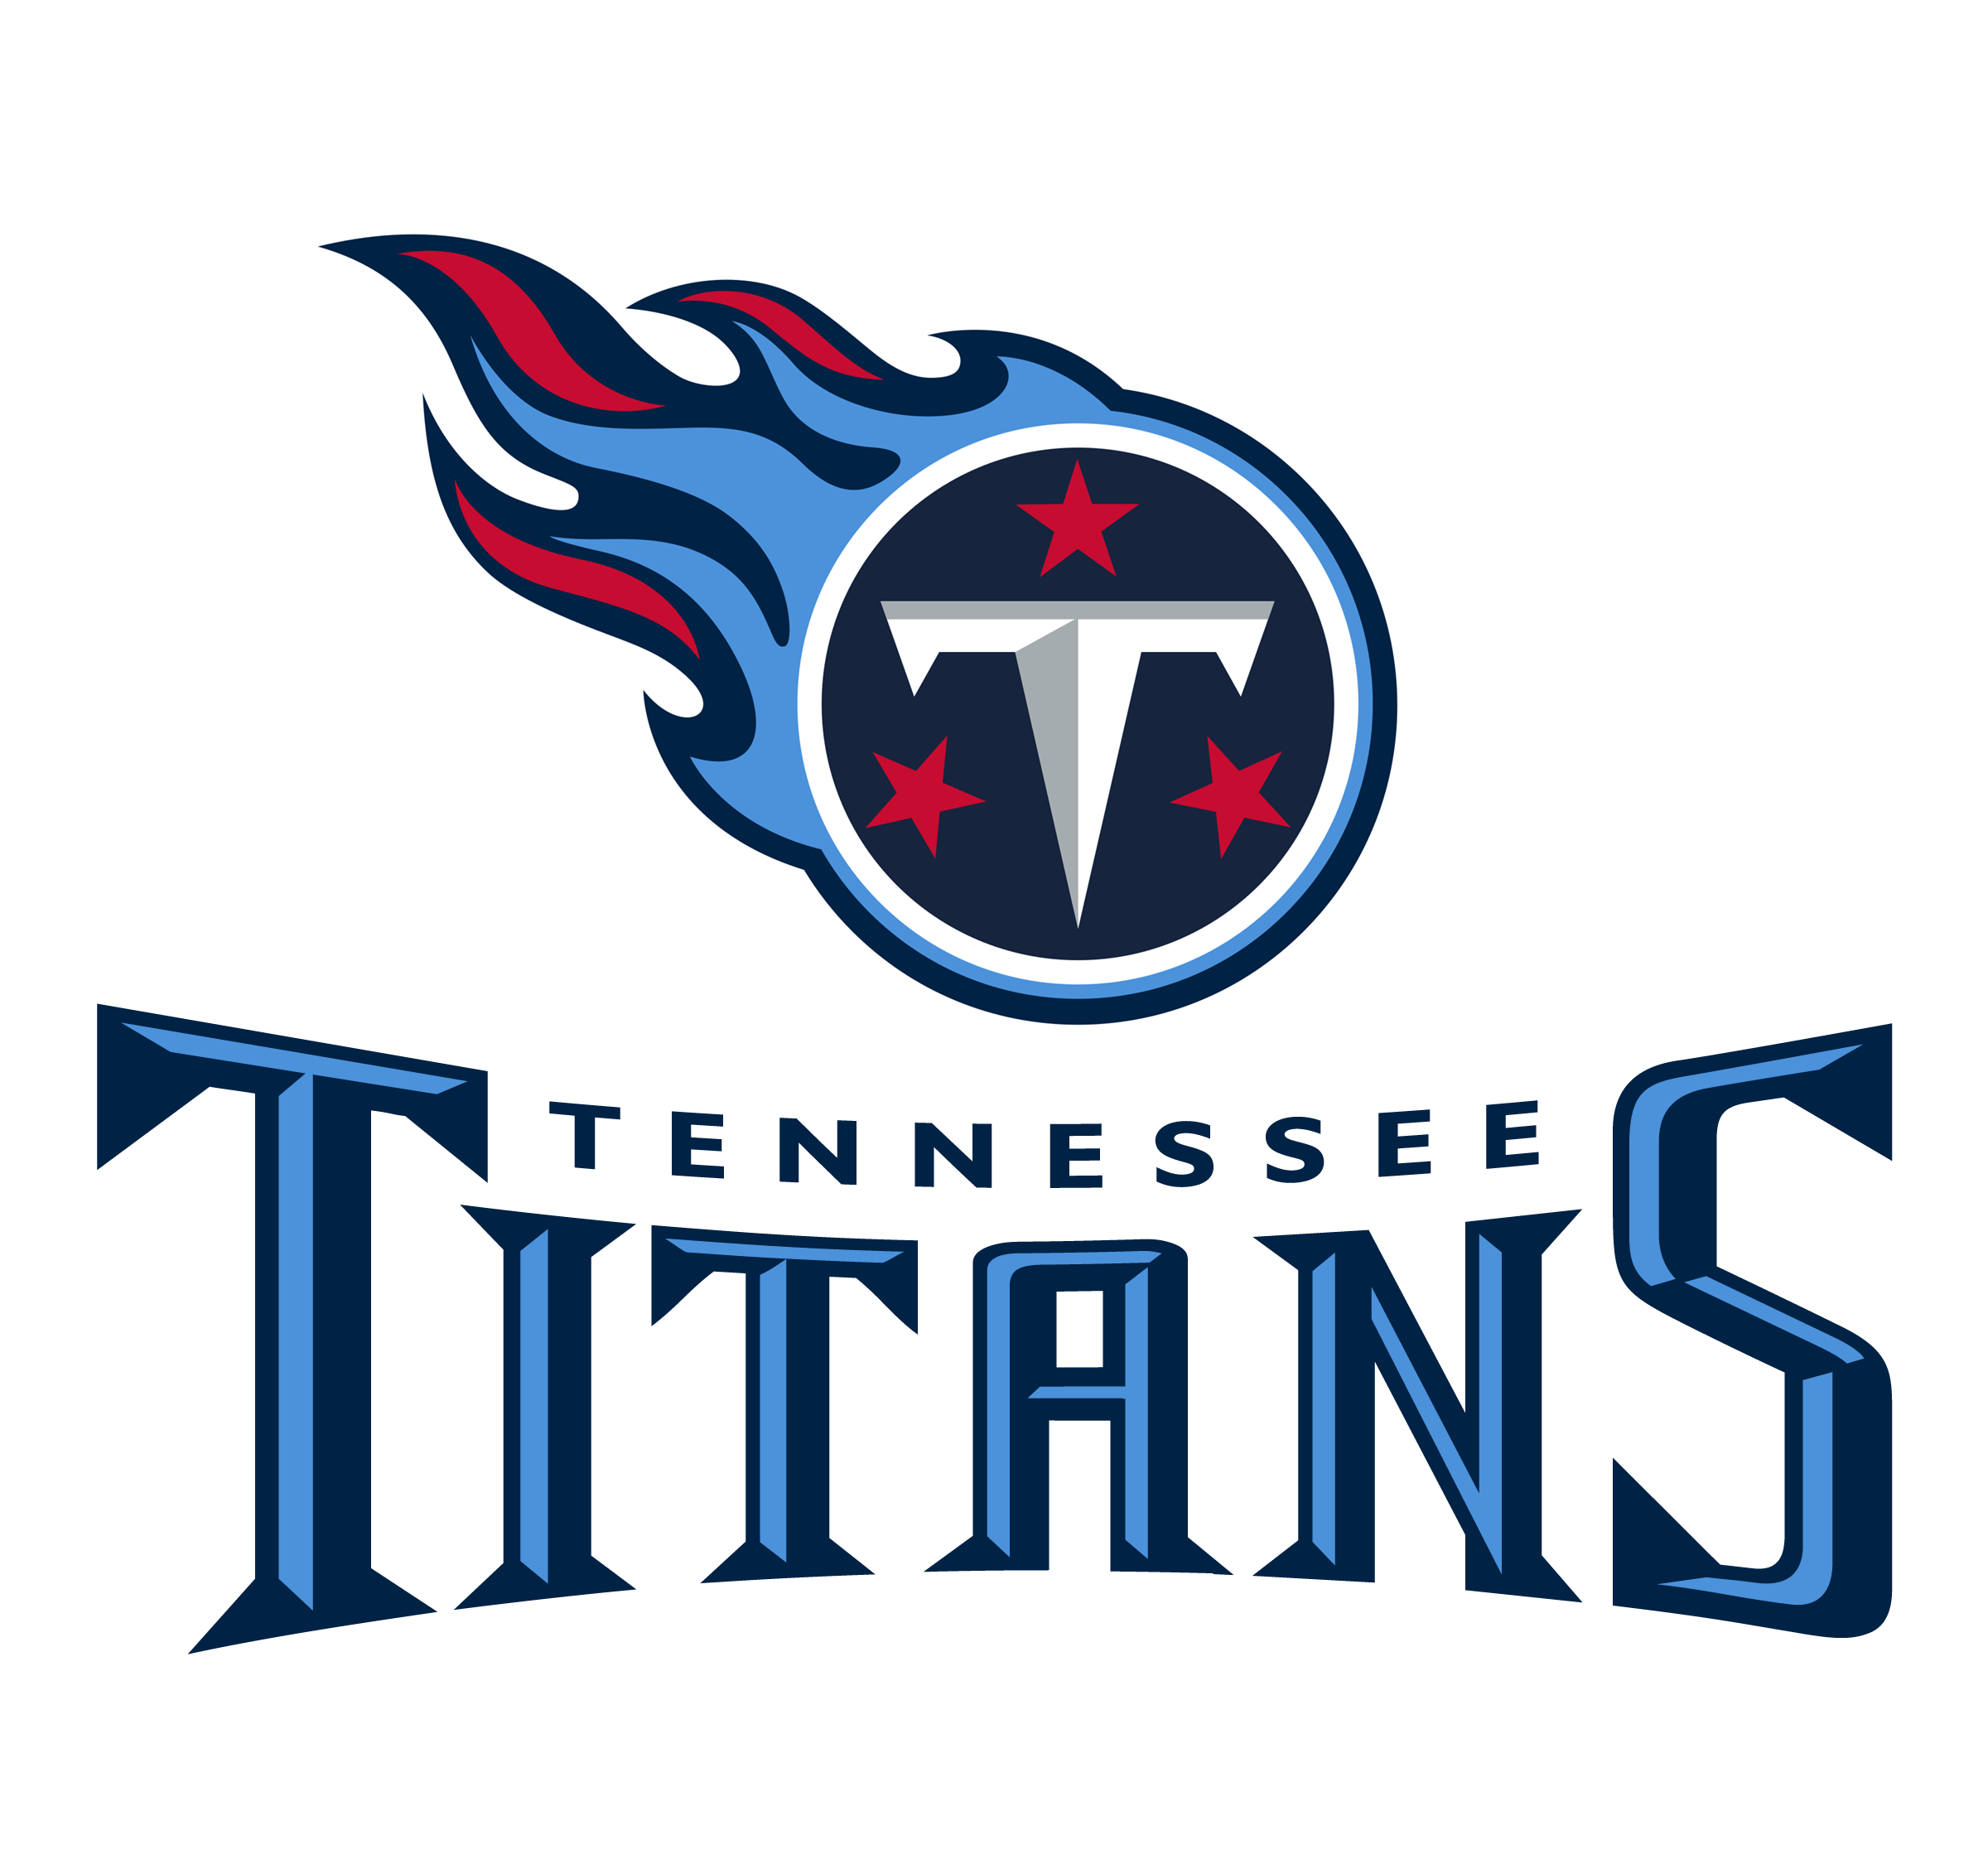 Tennessee Titans logo outline